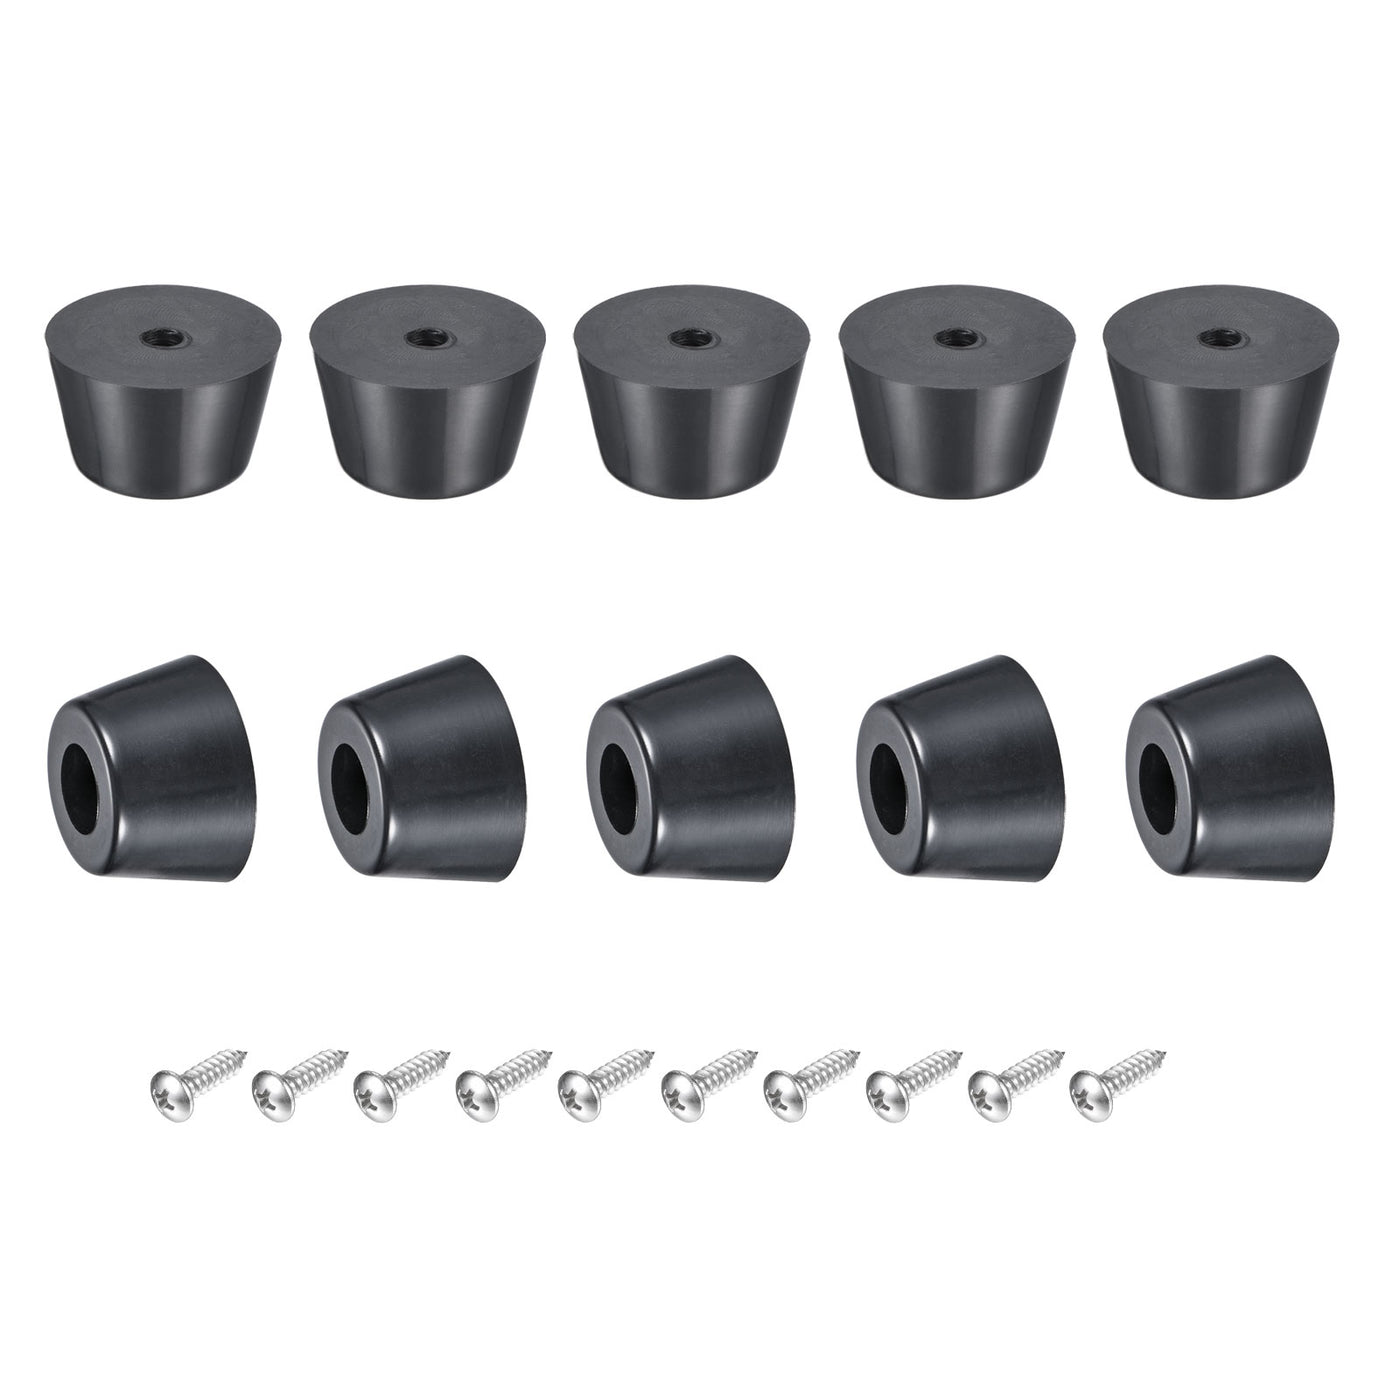 uxcell Uxcell Rubber Bumper Feet, 0.59" H x 0.98" W Round Pads with Stainless Steel Washer and Screws for Furniture, Appliances, Electronics 24 Pcs